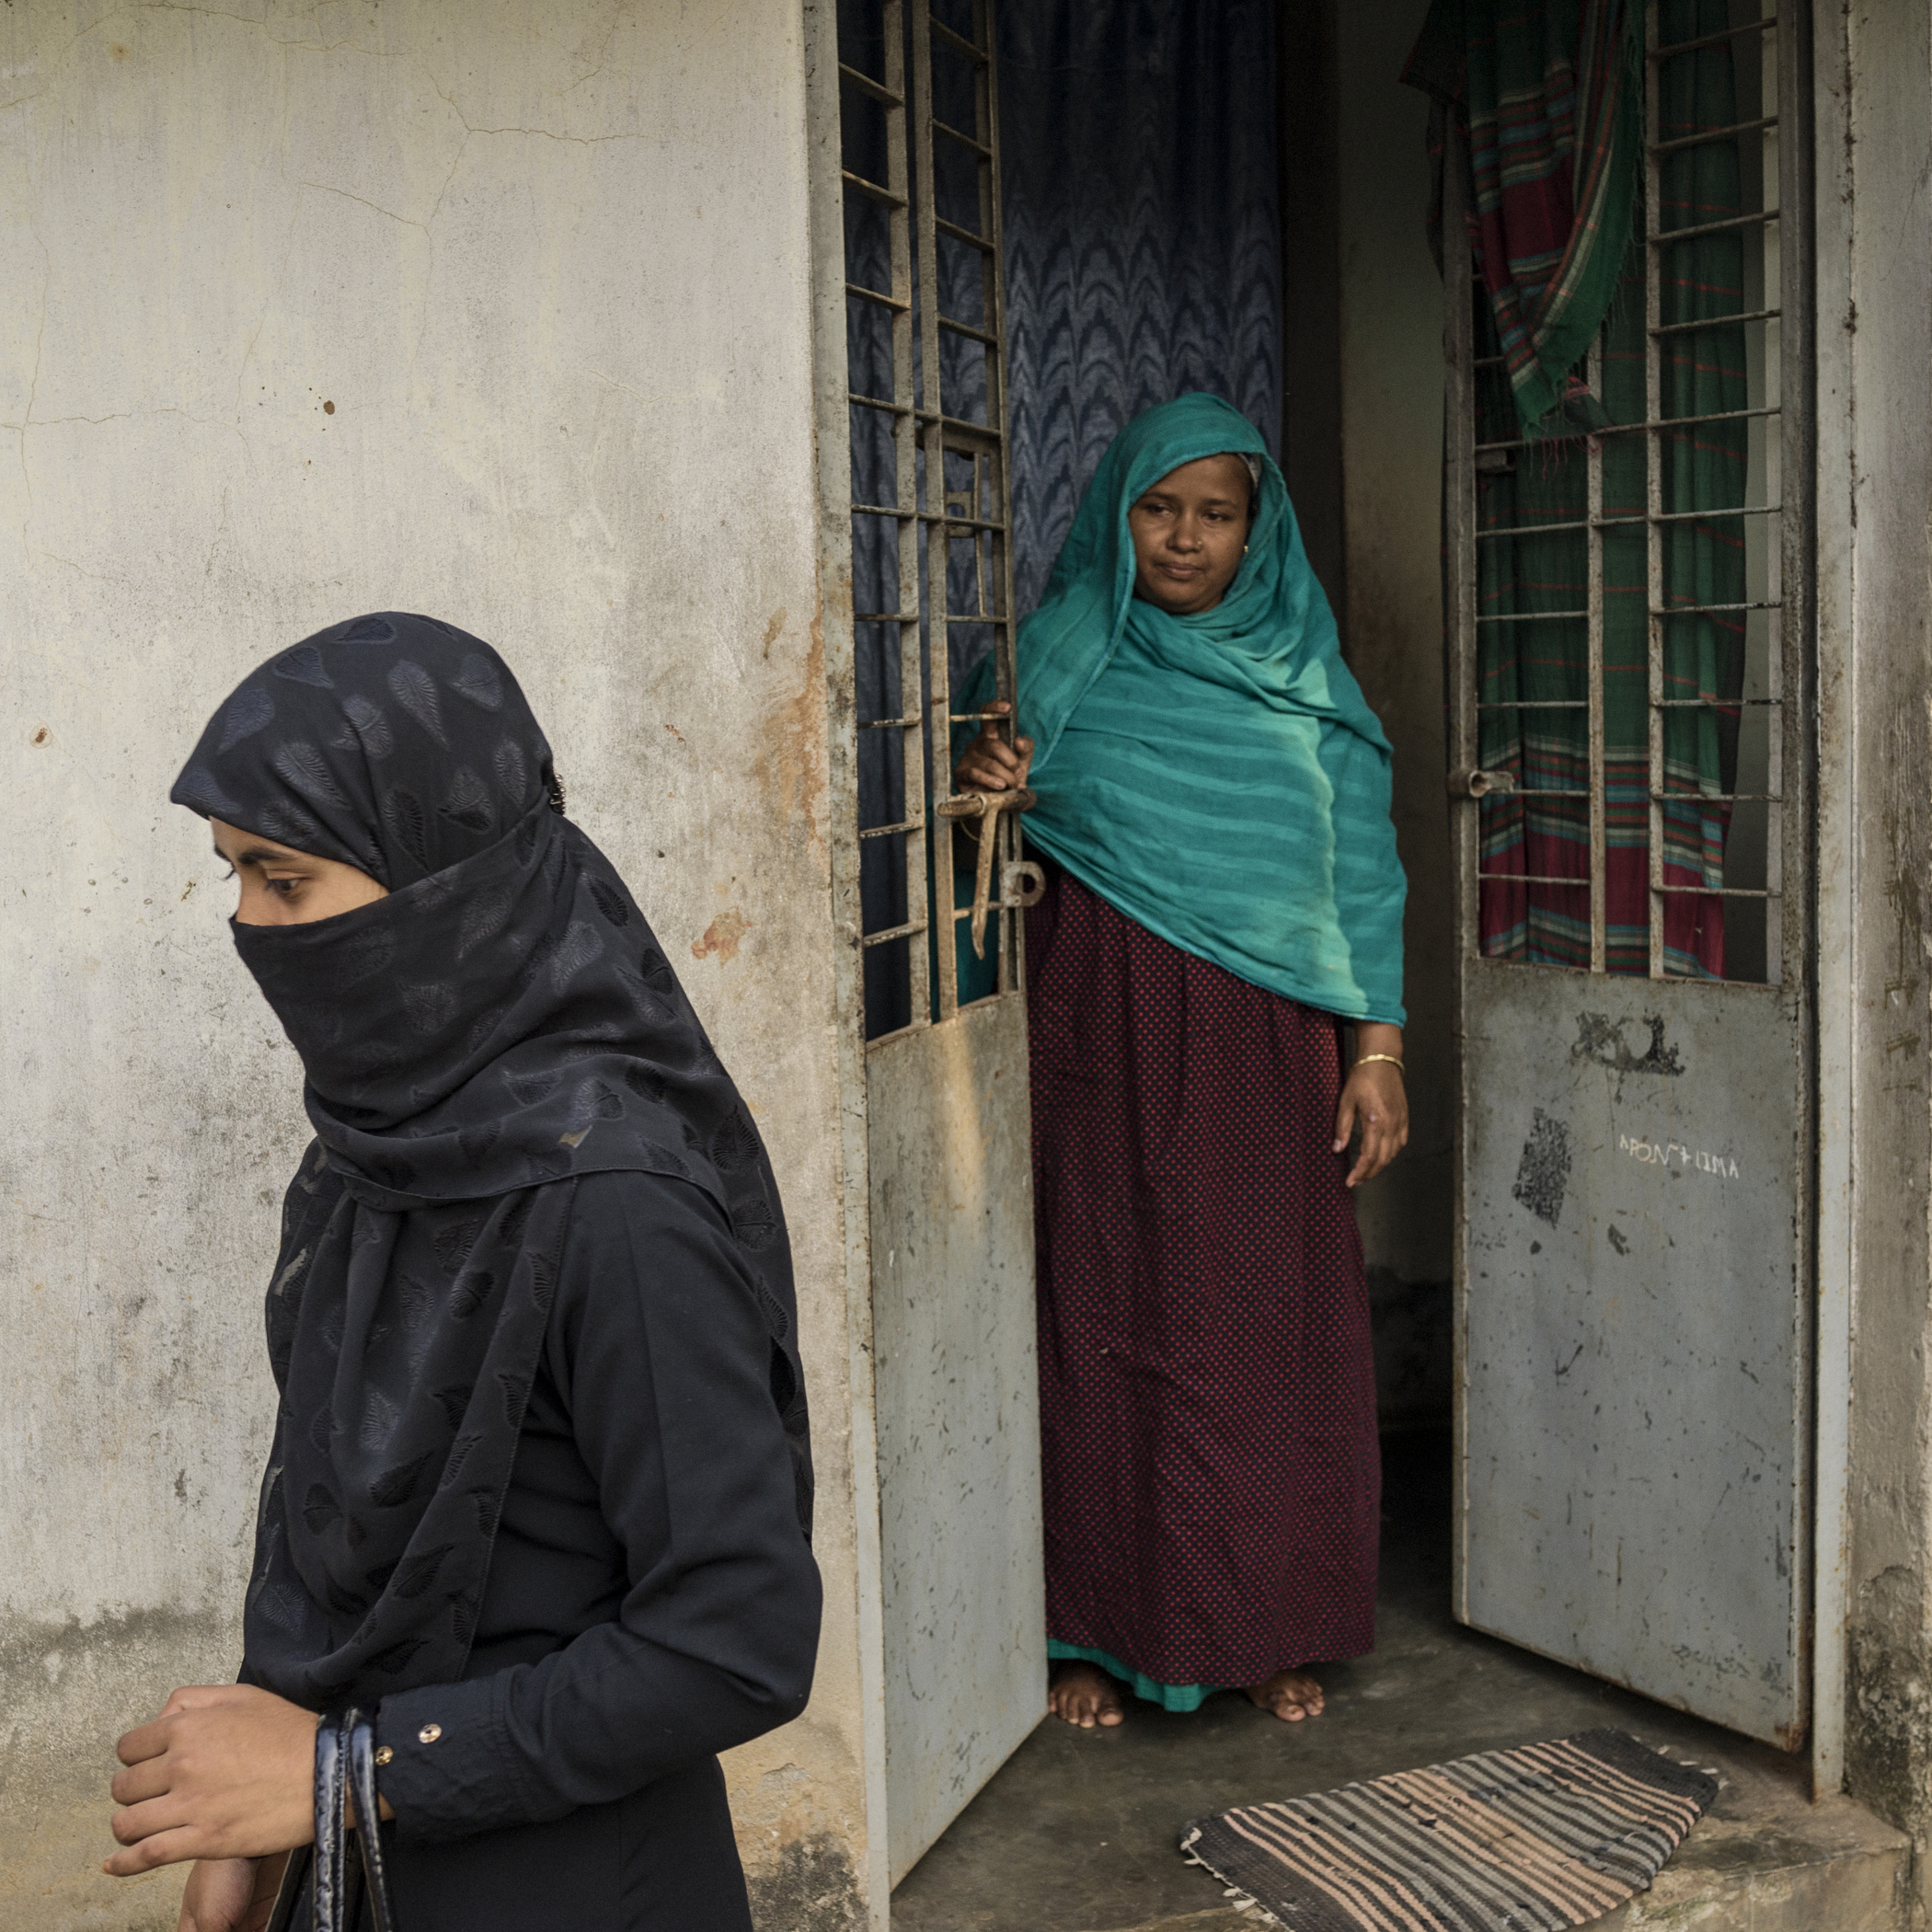 Taslima now works in another garments factory as she neither has other experience or educational qualification to work somewhere else, nor she has the required fund to start a business of her own.